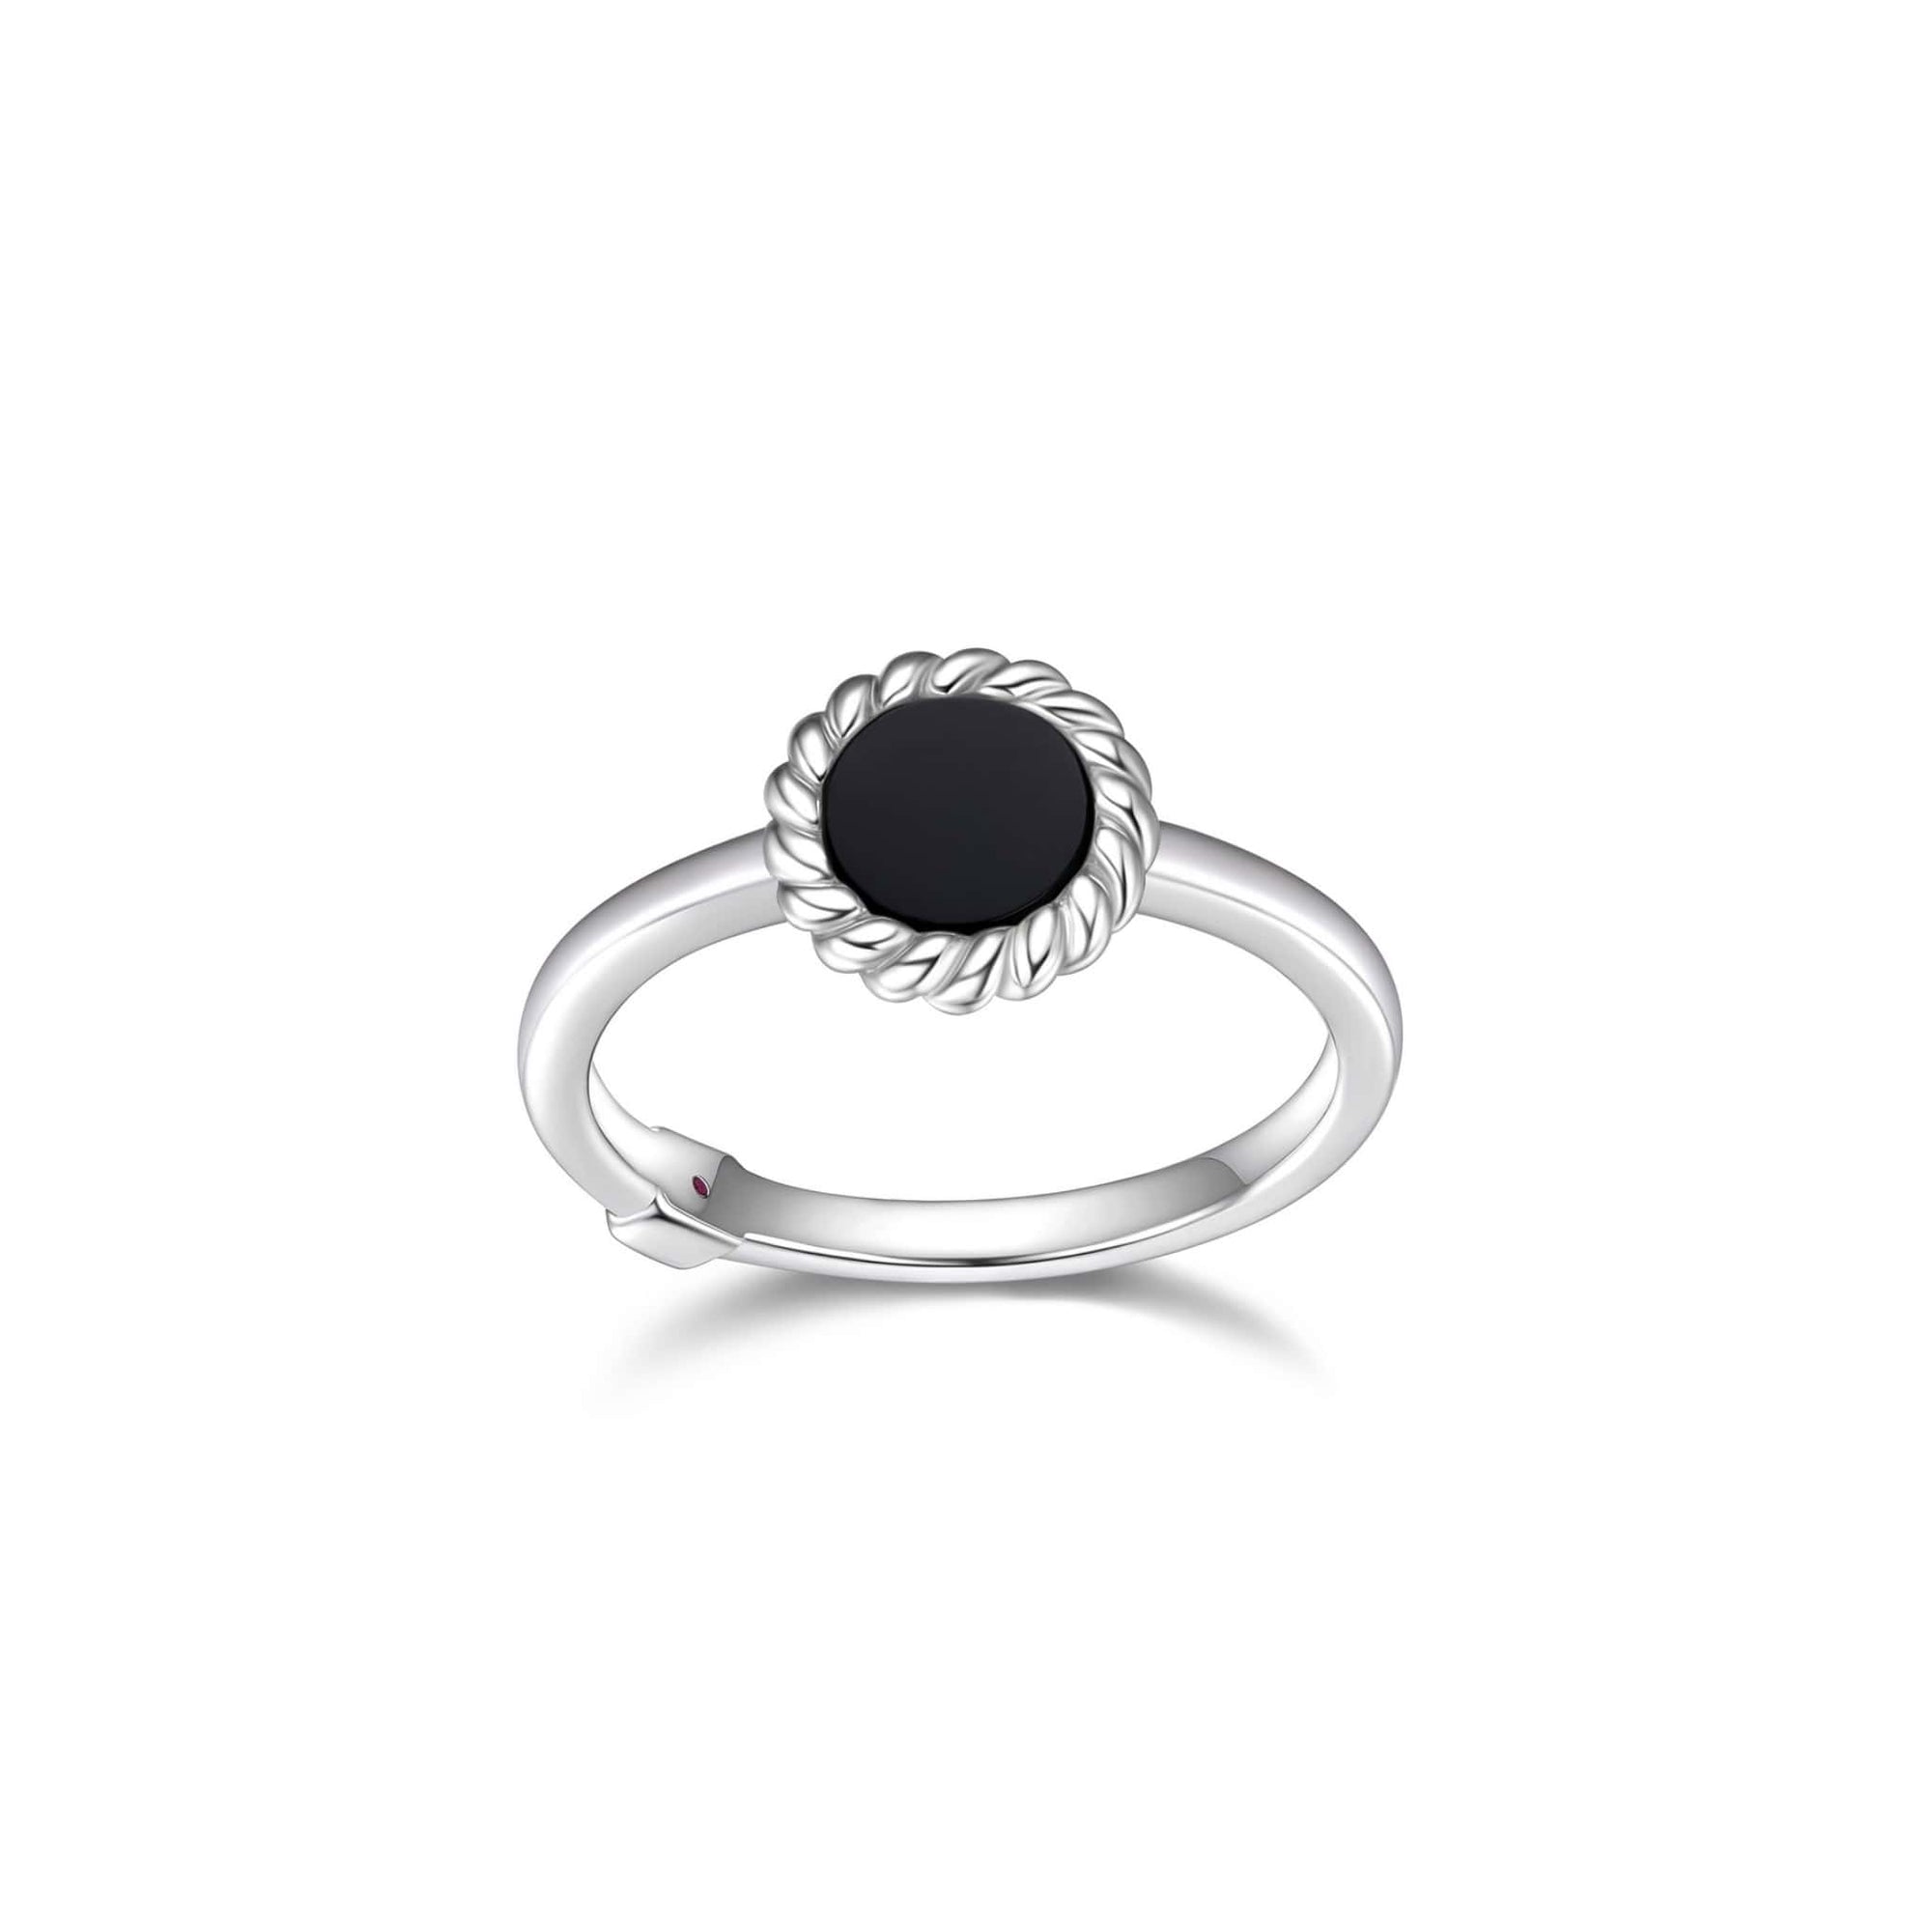 ELLE "Nautical" Black Agate Silver Ring at Arman's Jewellers